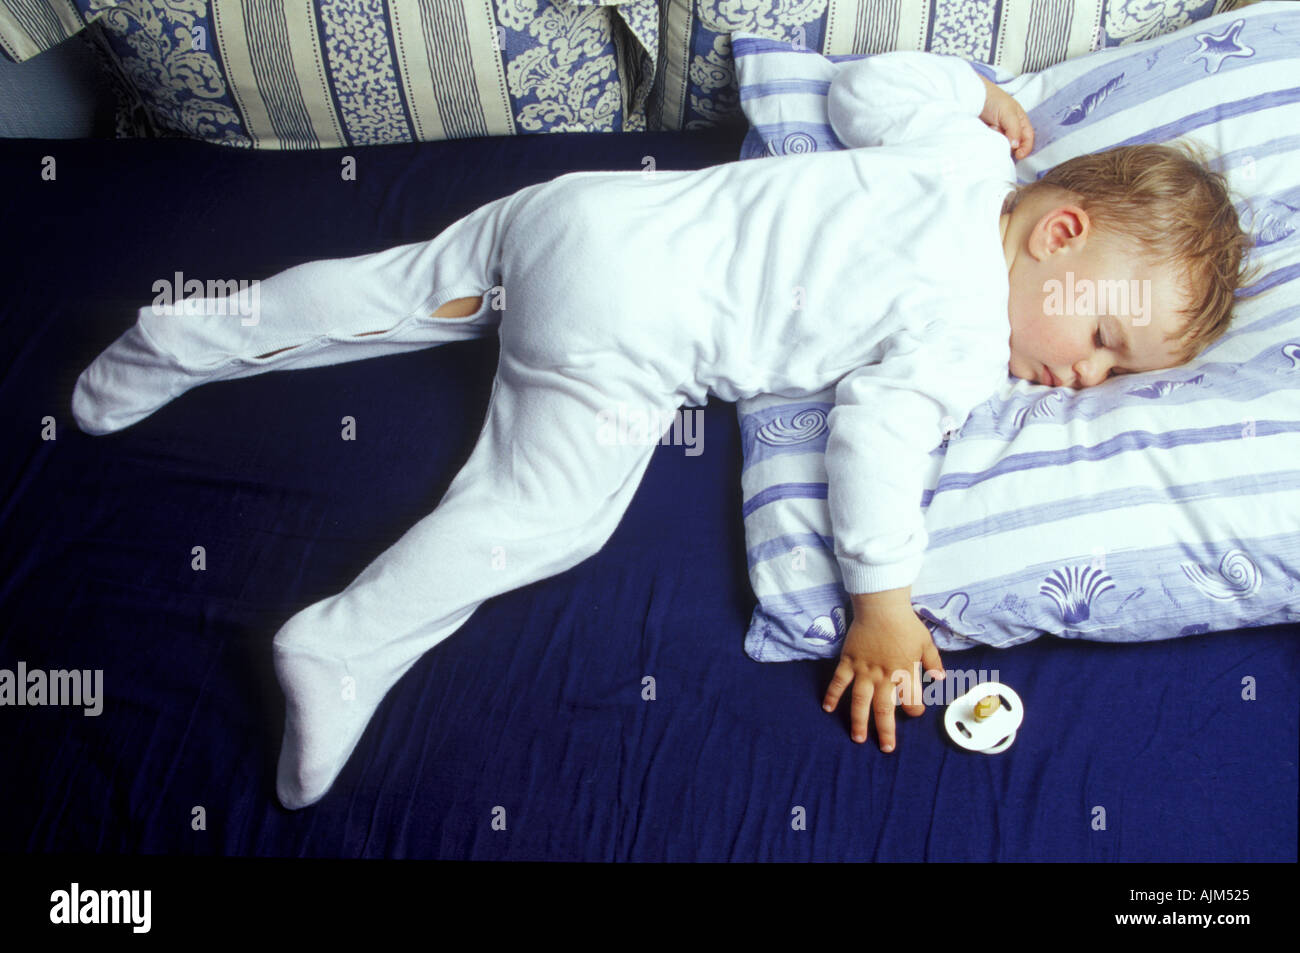 Sleeping baby boy on bed with pillow and white dress Stock Photo